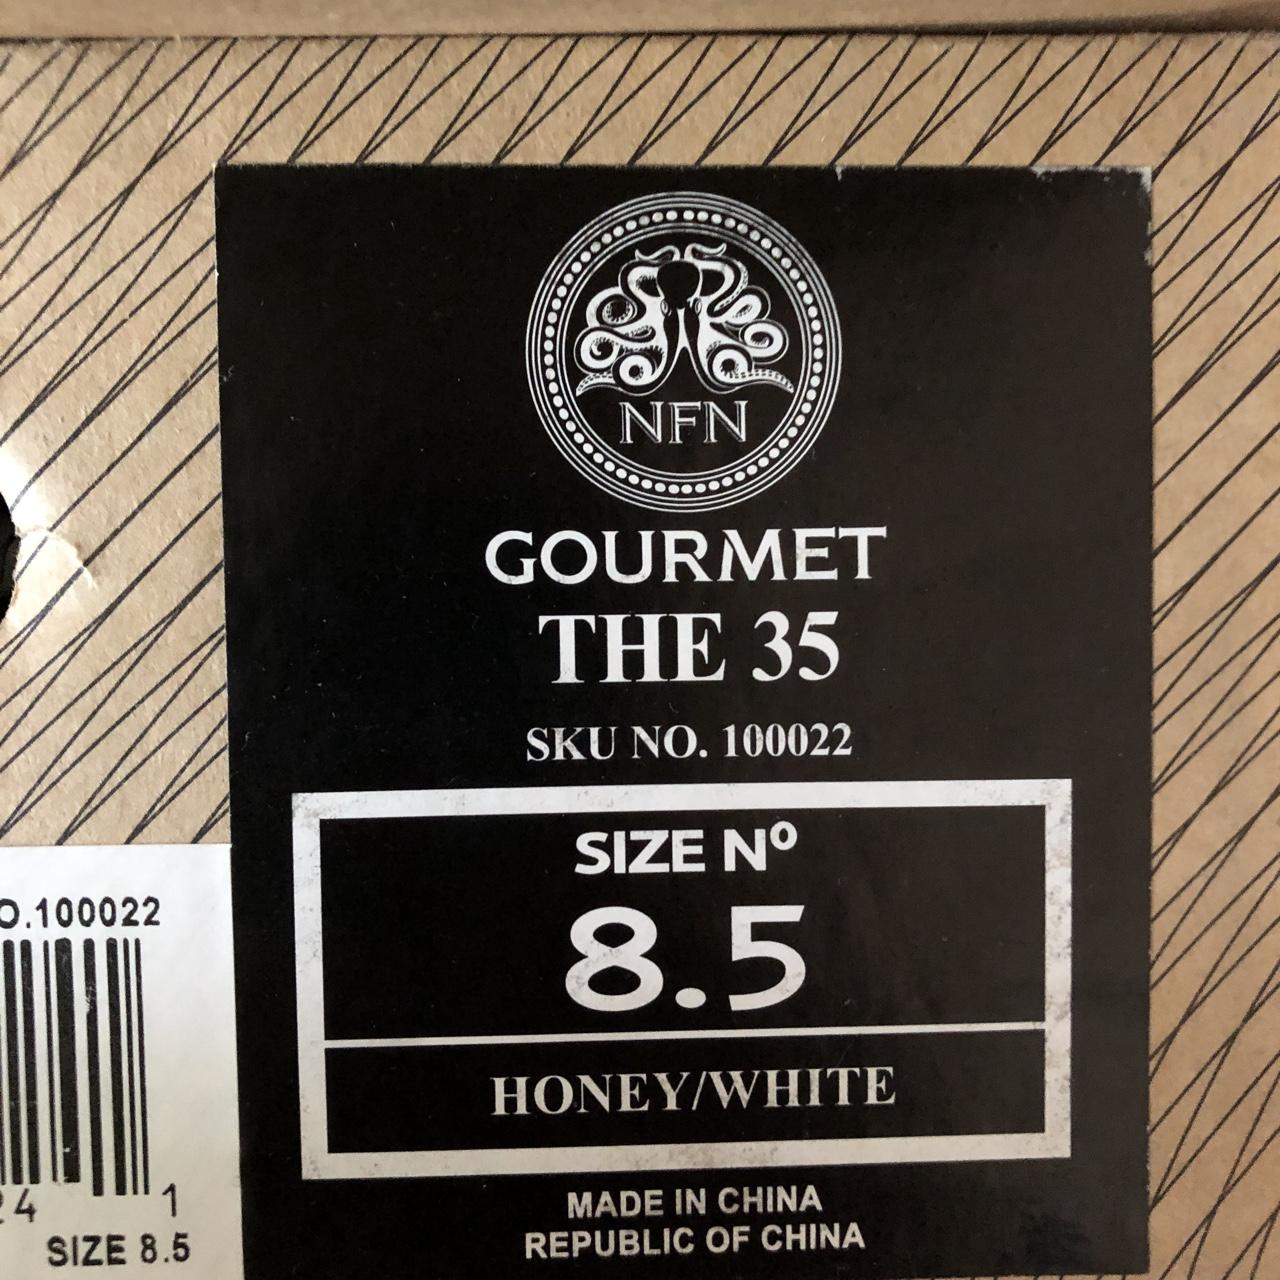 Product Image 3 - Gourmet Sneakers. The 35 with